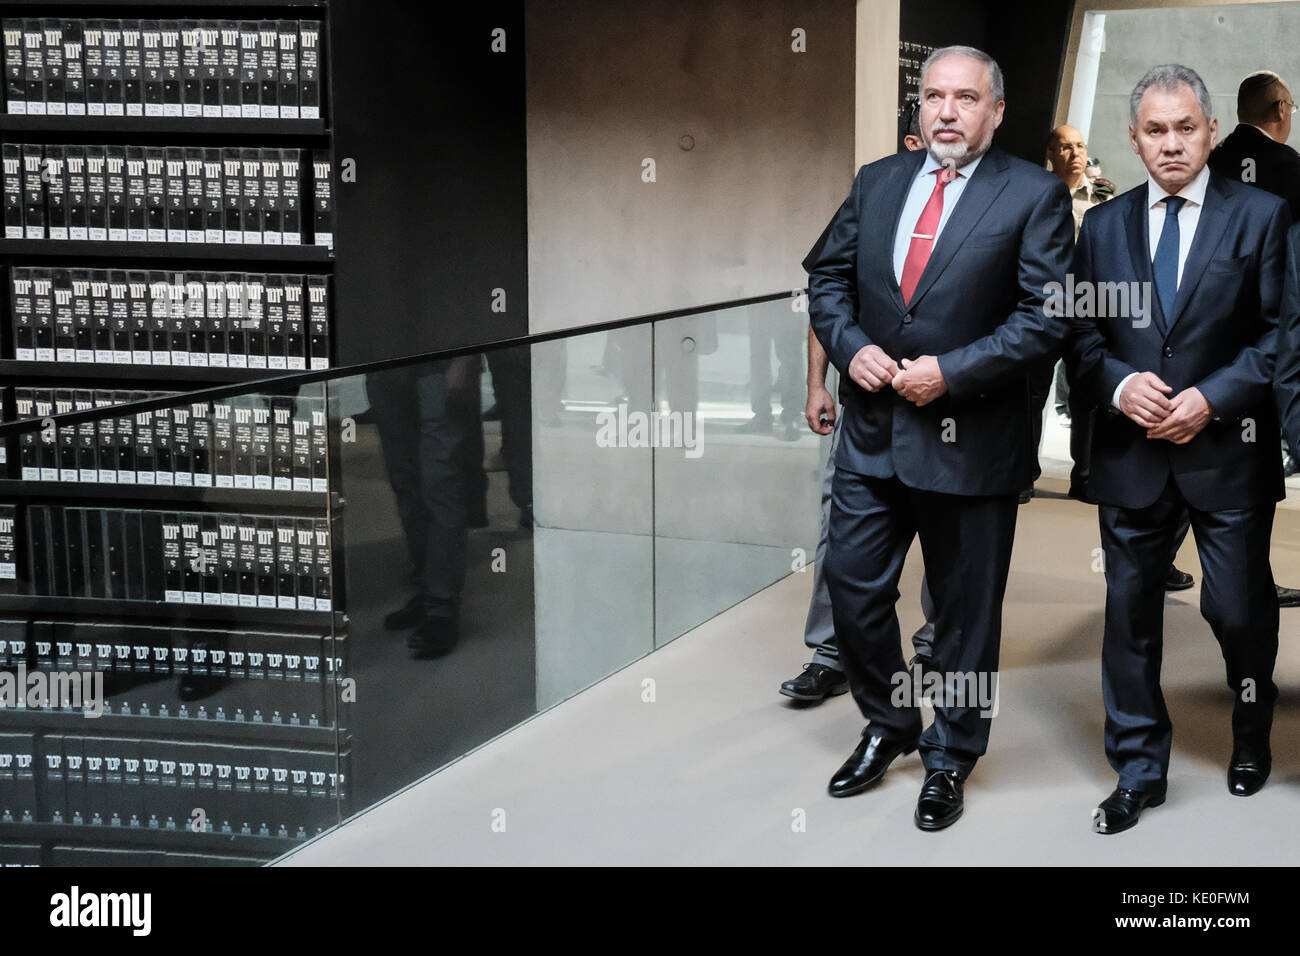 Jerusalem, Israel. 17th Oct, 2017. Minister of Defense of the Russian Federation, General of the Army, SERGEI SHOIGU (R), gazes up at enlarged Pages of Testimony in the Hall of Names at Yad Vashem Holocaust Museum, where Pages of Testimony of more than 4,000,000 Jewish Holocaust victims are eternally preserved. Escorted by Israeli Defense Minister, AVIGDOR LIEBERMAN (L), Shoigu toured the Yad Vashem Holocaust Museum, participated in a memorial ceremony, visited the Children's Memorial and signed the museum guest book. Credit: Nir Alon/Alamy Live News Stock Photo